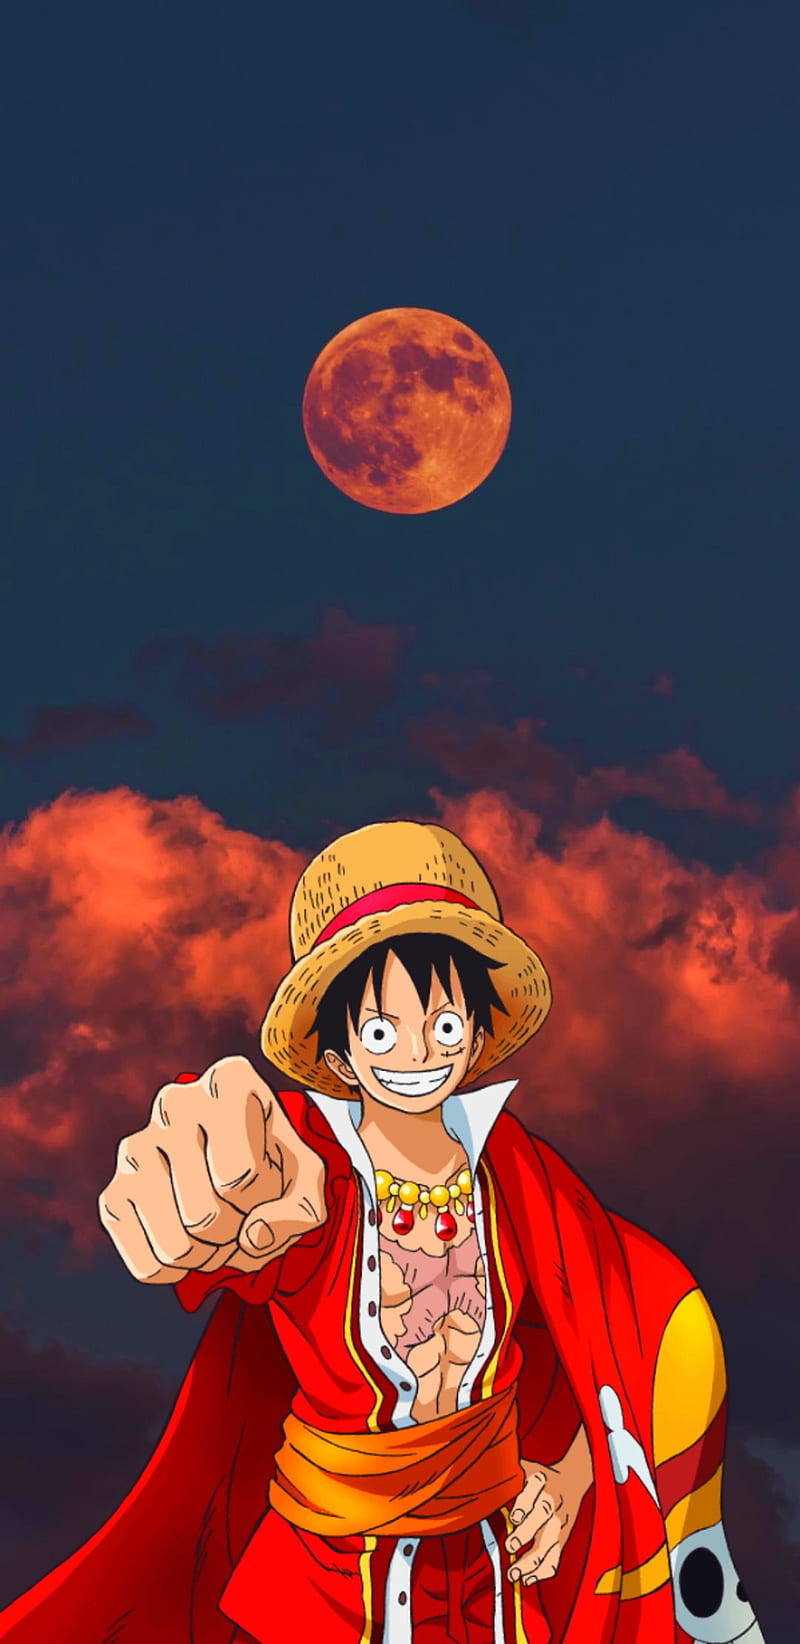 Luffy Background Discover more Eiichiro Oda Fictional Character Luffy  Manga Series One Piece wallpapers httpswwww  Luffy Monkey d luffy One  piece luffy